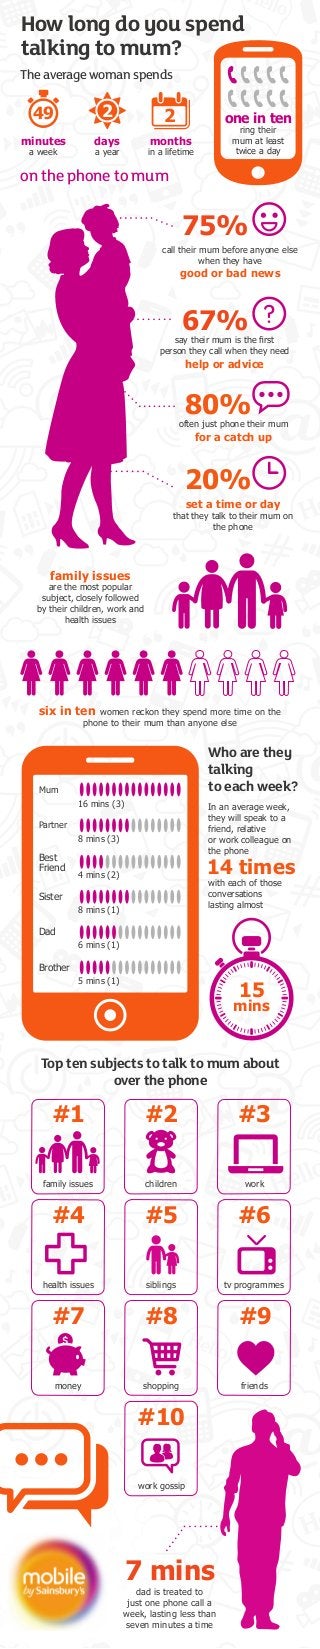 Mum
16 mins (3)
Best
Friend
4 mins (2)
Partner
8 mins (3)
8 mins (1)
Dad
6 mins (1)
Brother
5 mins (1)
In an average week,
they will speak to a
friend, relative
or work colleague on
the phone
with each of those
conversations
lasting almost
six in ten women reckon they spend more time on the
phone to their mum than anyone else
14 times
Top ten subjects to talk to mum about
over the phone
Who are they
talking
to each week?
family issues
are the most popular
subject, closely followed
by their children, work and
health issues
call their mum before anyone else
when they have
good or bad news
75%
set a time or day
that they talk to their mum on
the phone
20%
often just phone their mum
for a catch up
80%
say their mum is the first
person they call when they need
help or advice
67%
15
mins
family issues
#1
children
#2
work
#3
tv programmes
#6
siblings
#5
health issues
#4
money
#7
shopping
#8
friends
#9
work gossip
#10
How long do you spend
talking to mum?
The average woman spends
on the phone to mum
days
a year
2
minutes
a week
49
months
in a lifetime
2 one in ten
ring their
mum at least
twice a day
dad is treated to
just one phone call a
week, lasting less than
seven minutes a time
7 mins
Sister
 